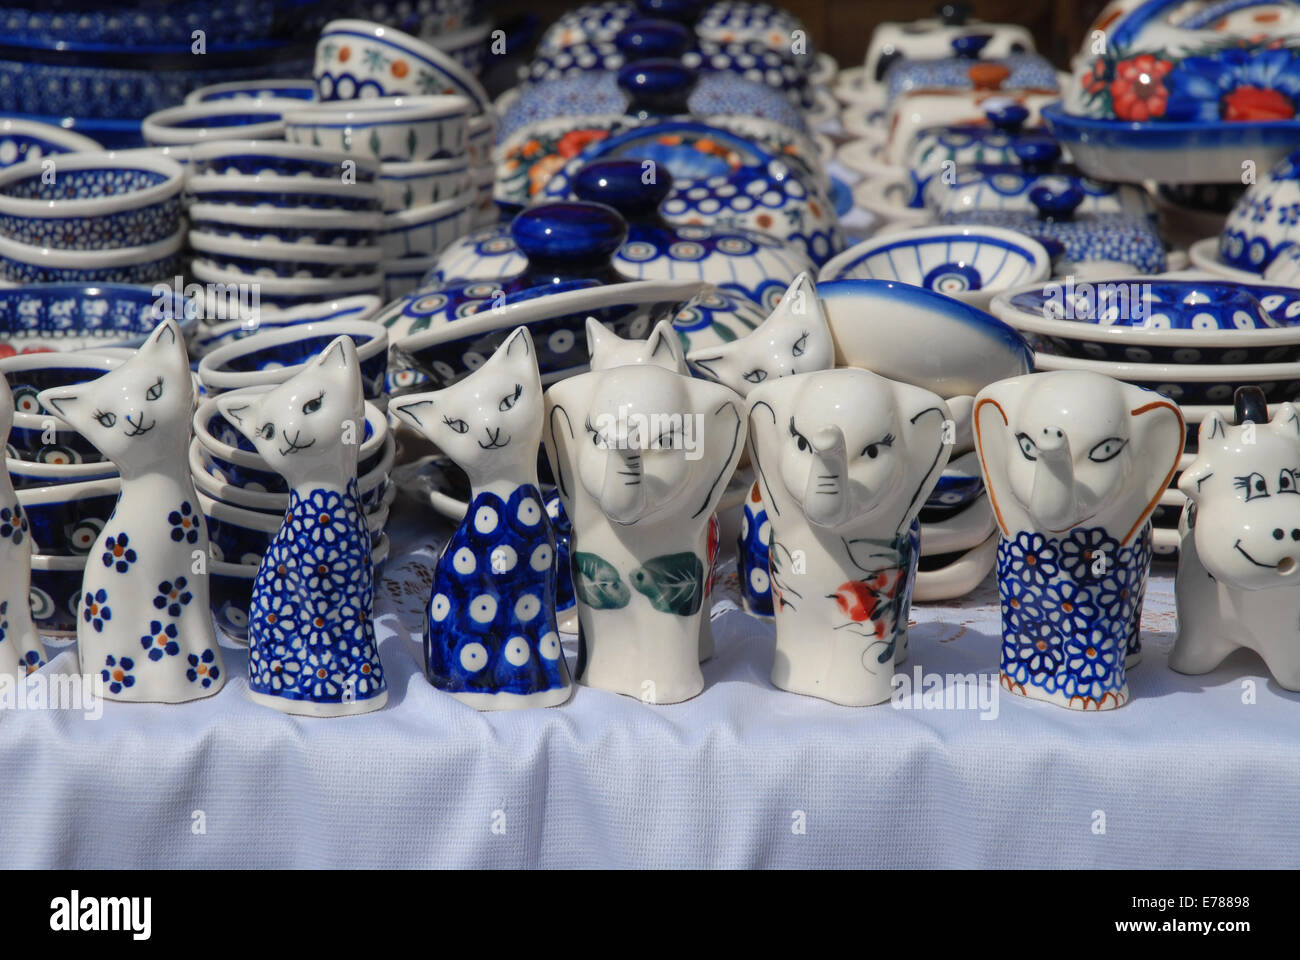 Typical Polish ceramics for sale on a market stall in Wroclaw, Lower Silesia, Poland Stock Photo